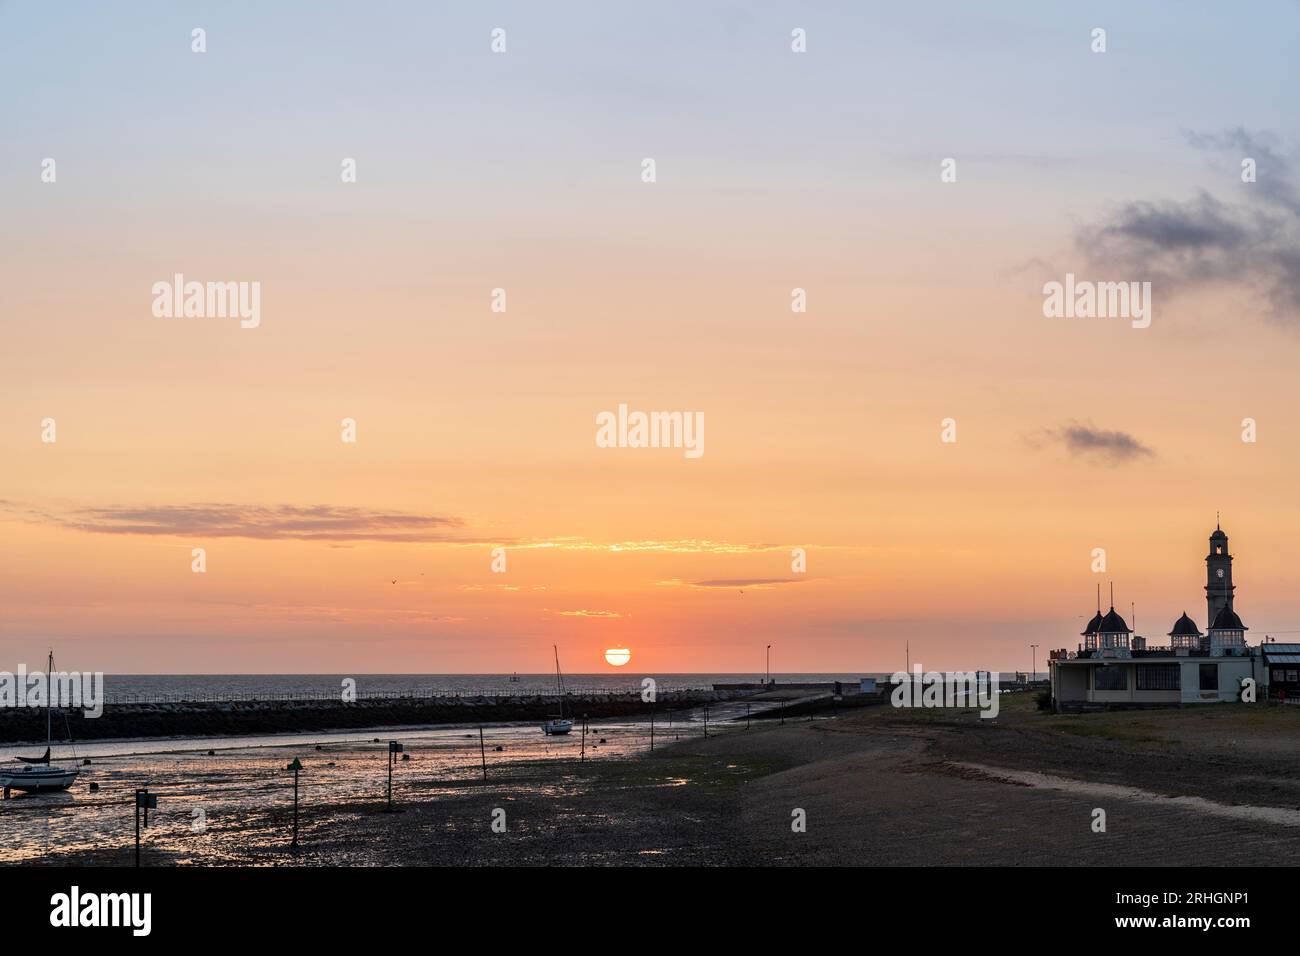 Sunrise into a orange sky over the single jetty of Herne bay harbour and the central bandstand with the distinctive clock tower behind, believed to be the oldest purpose built clock tower in the UK. The bandstand was designed by H. Kempton Dyson in 1924 and is build in the art deco style. Stock Photo